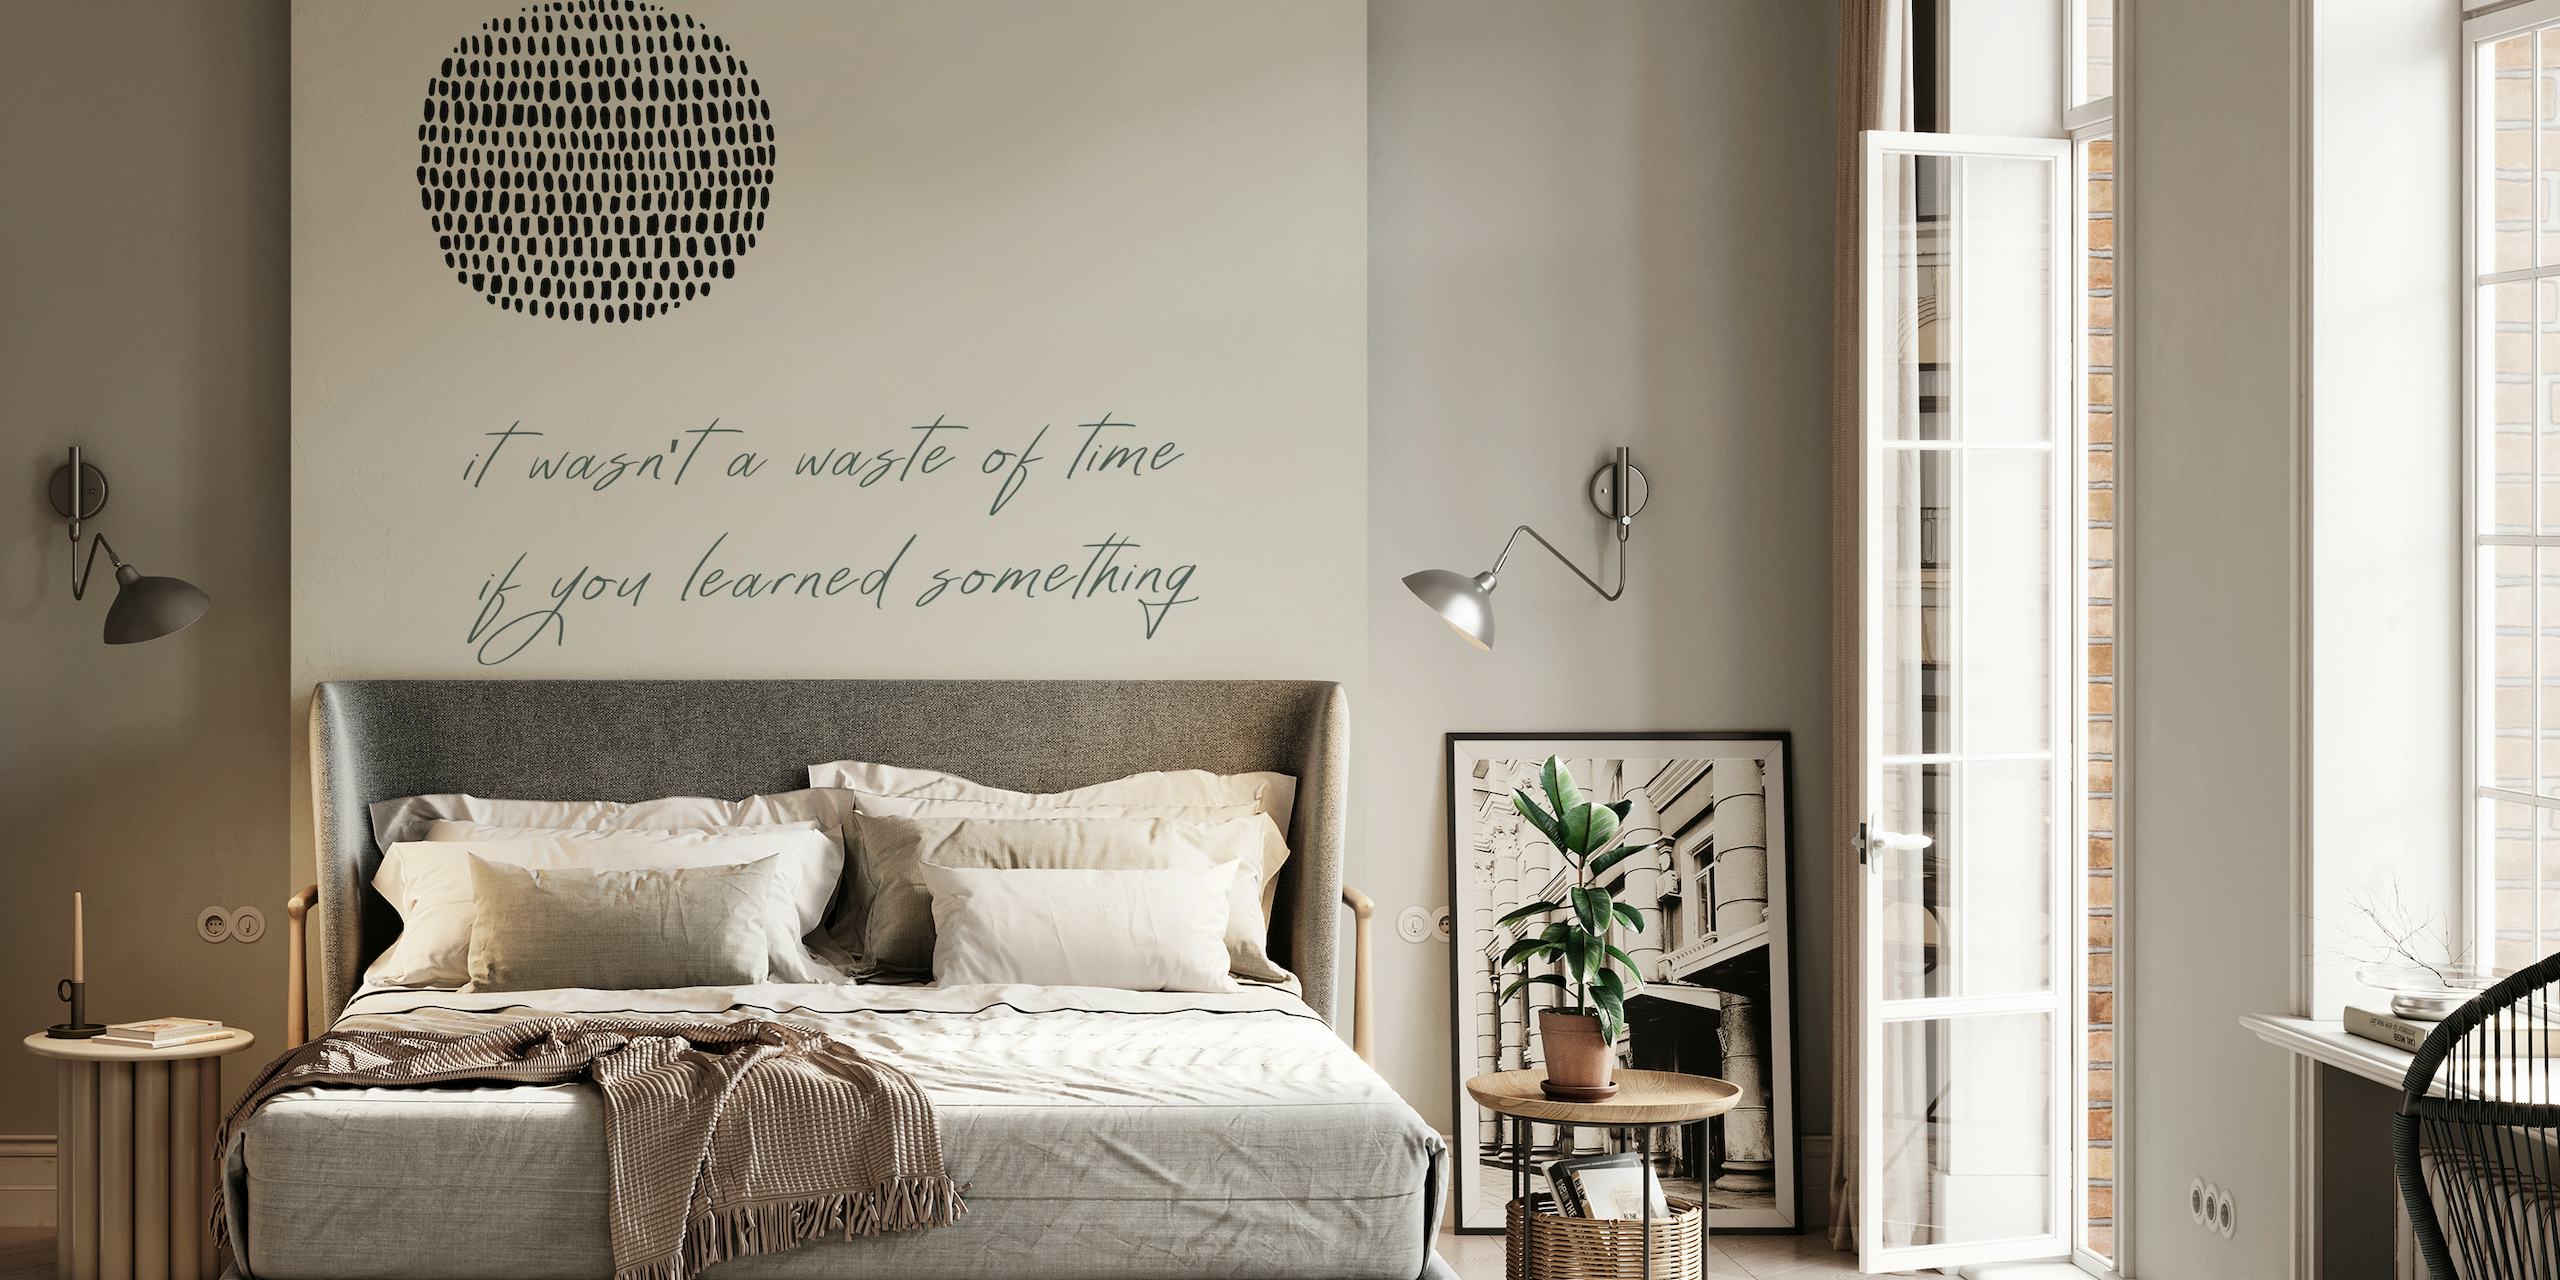 Monochrome Zen stones stack wall mural with inspirational quote